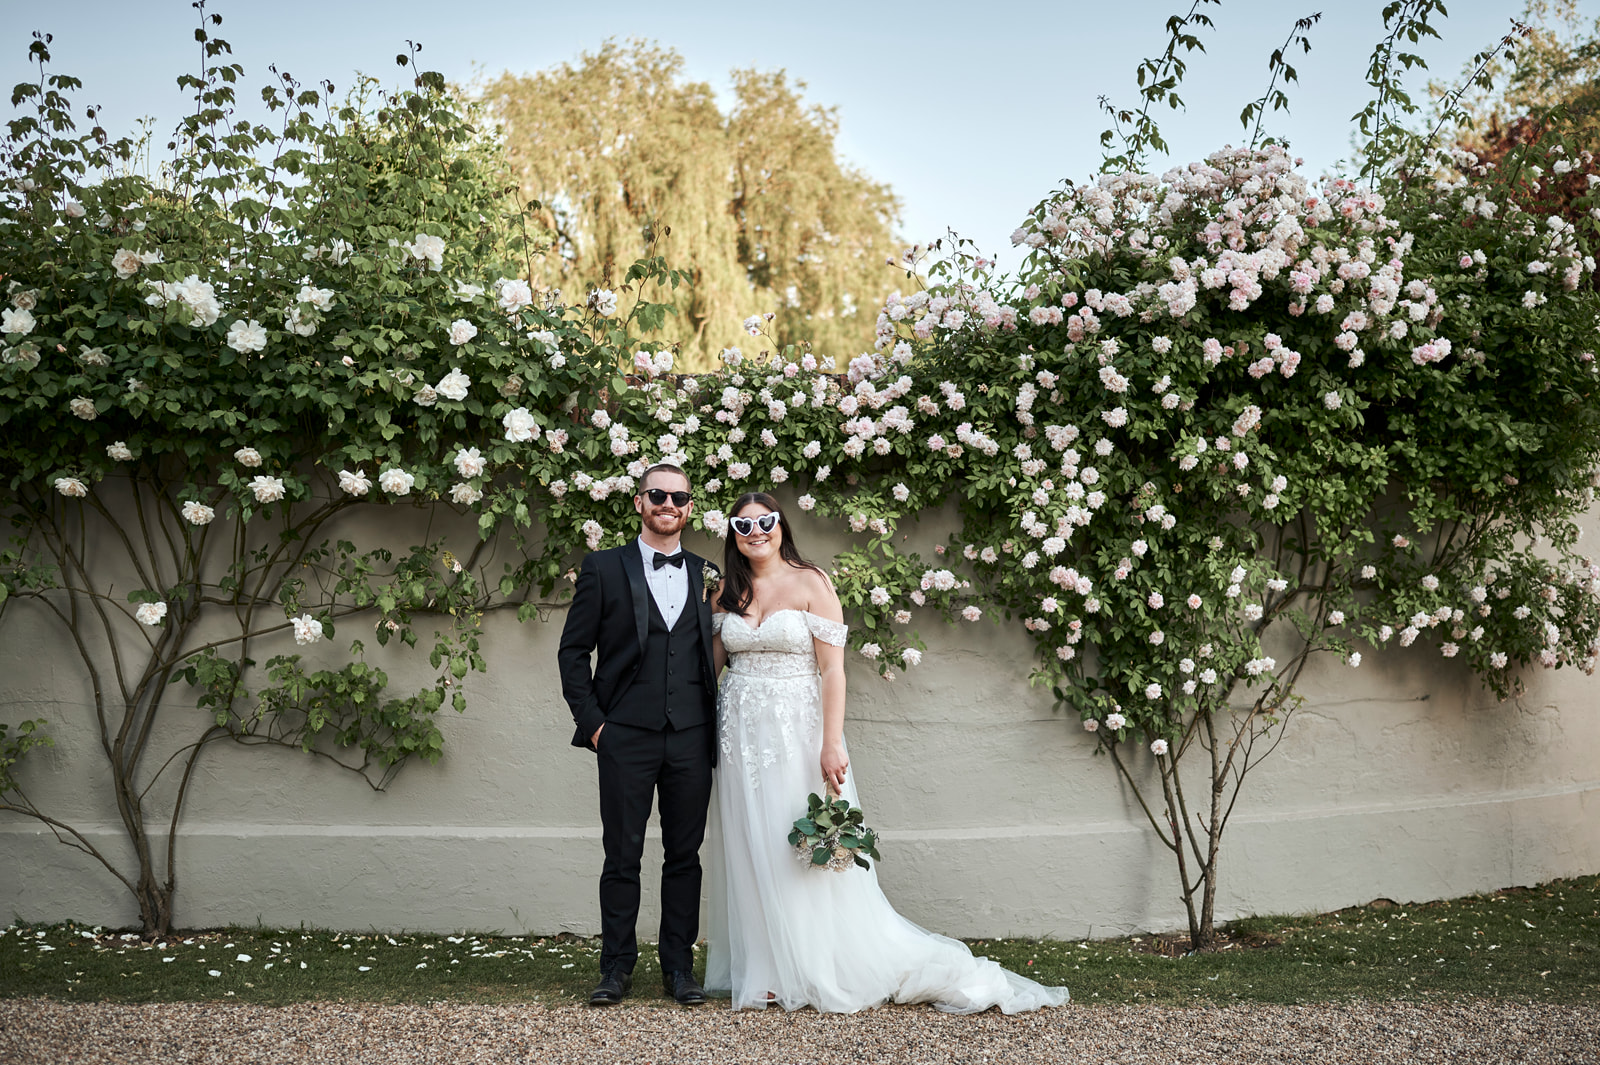 Couple with Sunglasses at Houchins Wedding Venue